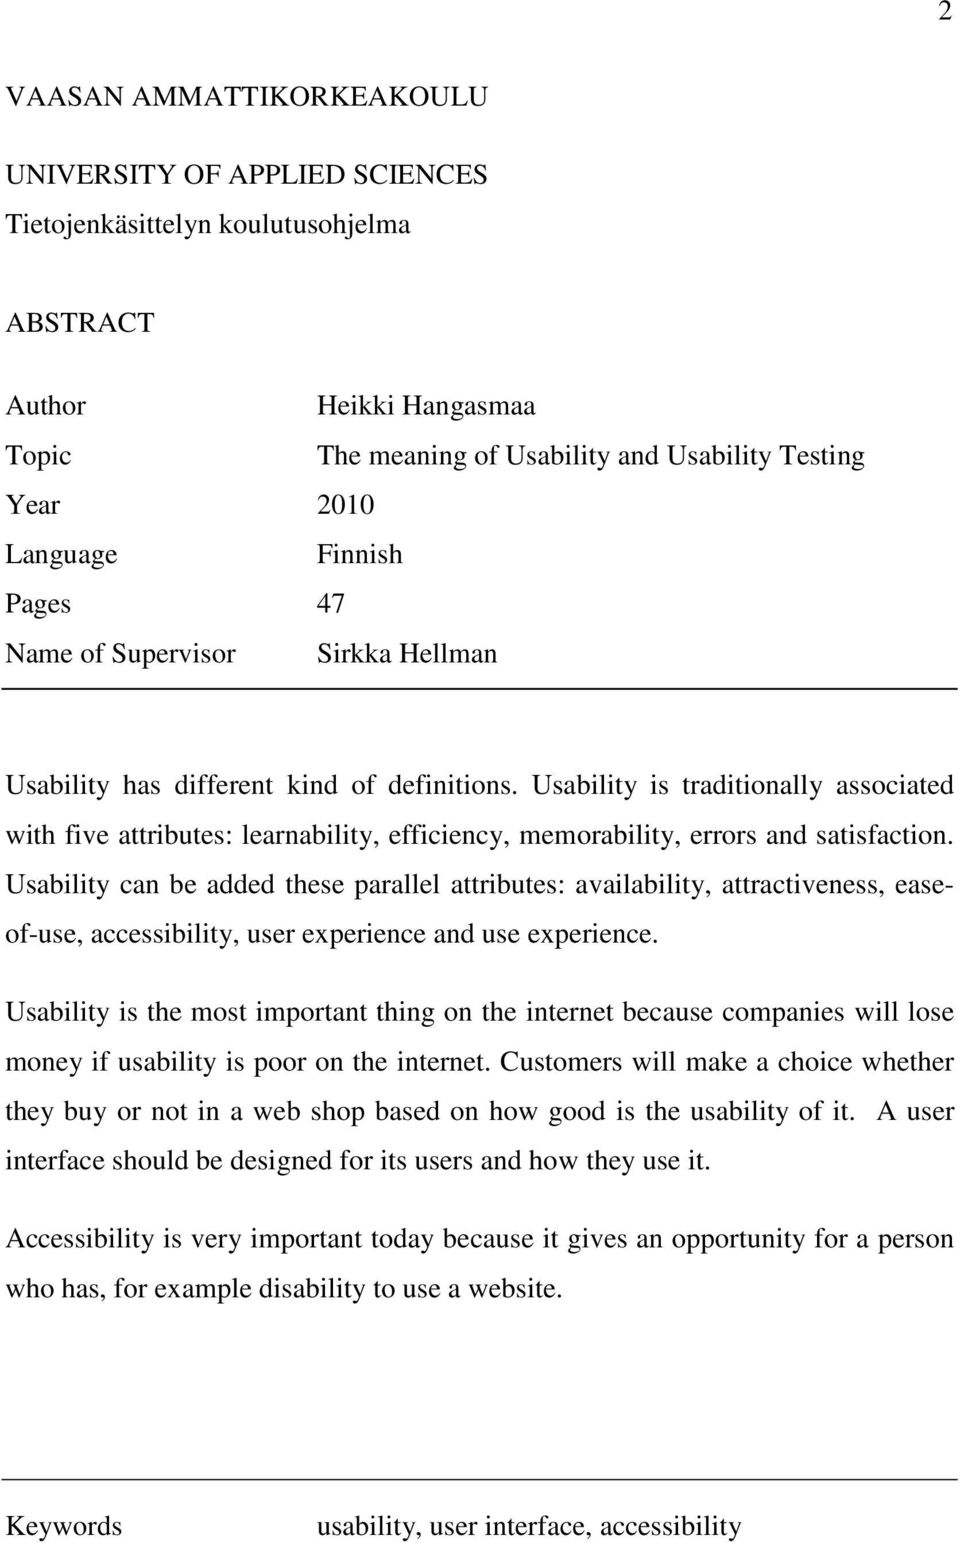 Usability is traditionally associated with five attributes: learnability, efficiency, memorability, errors and satisfaction.